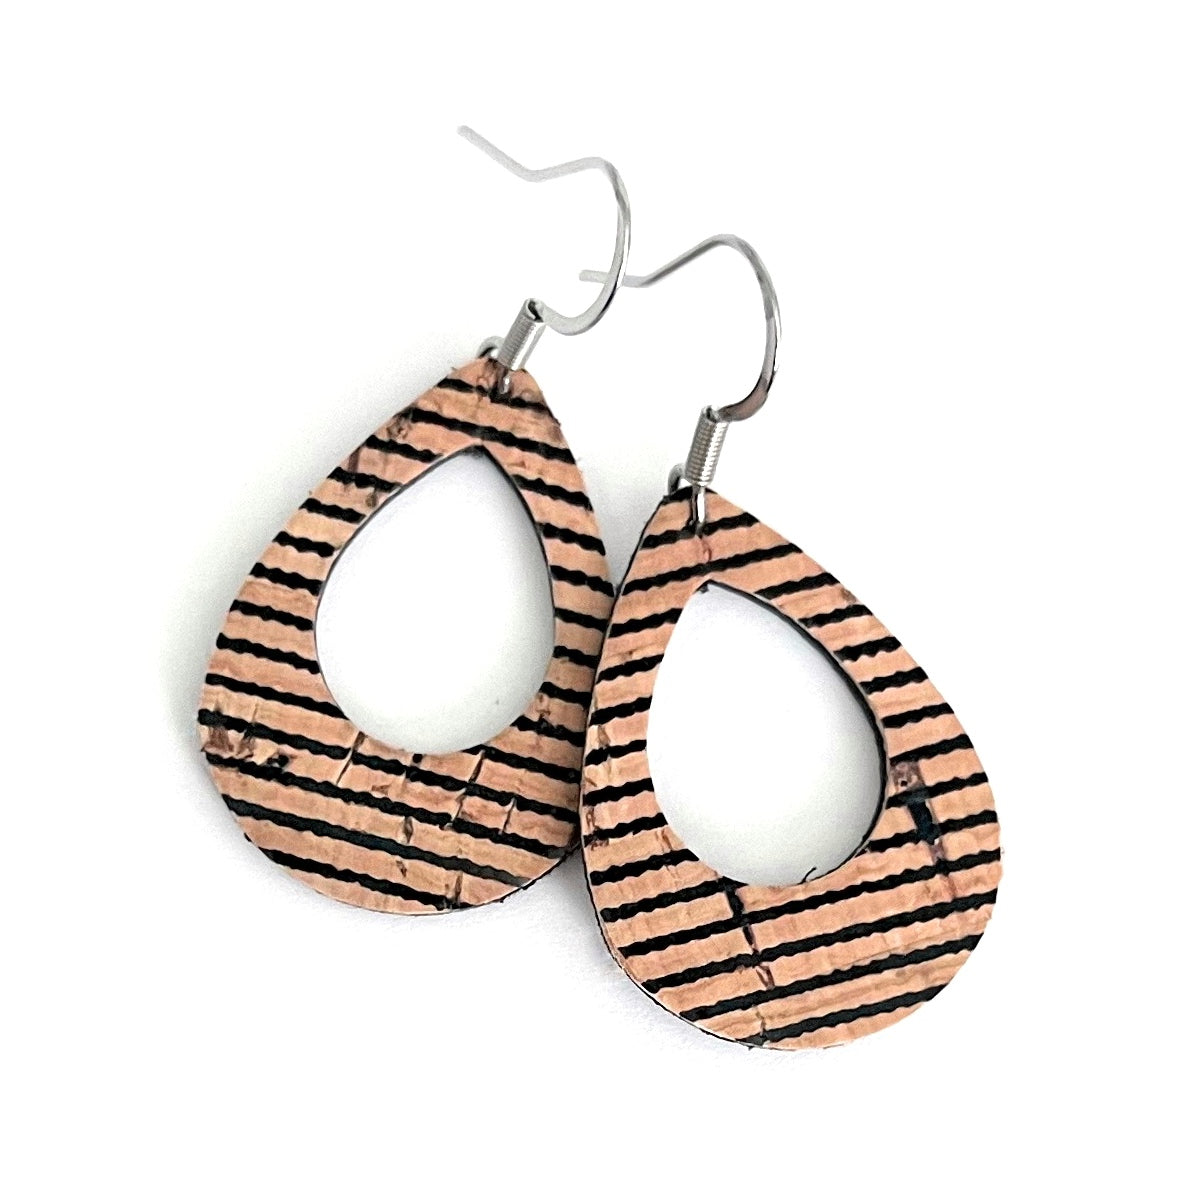 Mini Teardrop lightweight statement earrings with natural cork + leather and black pinstripes 